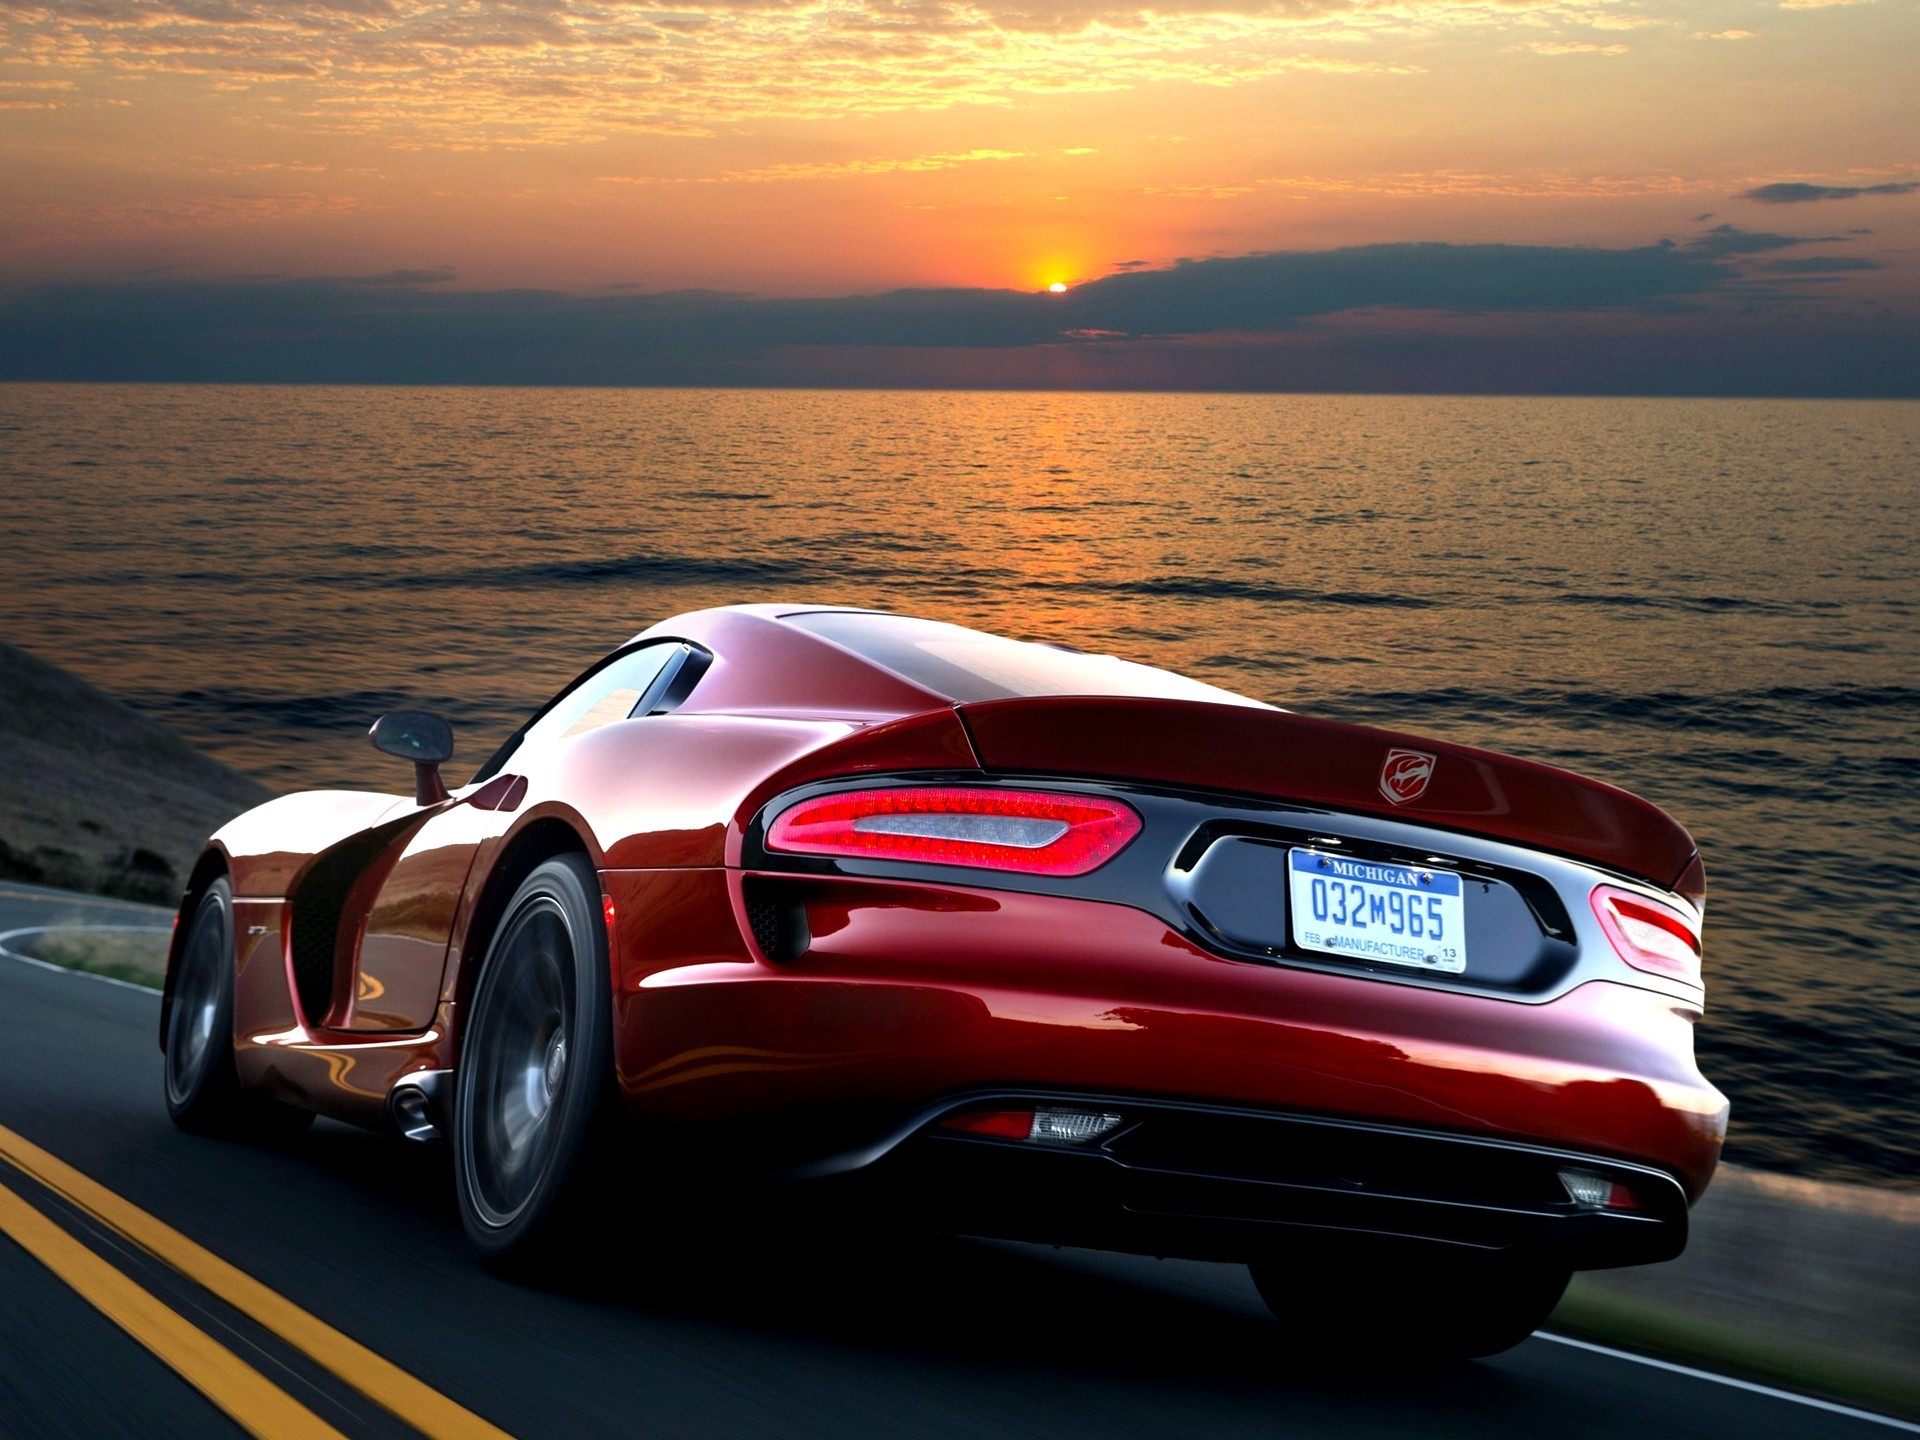 132090 3840x1080 PC pictures for free, download dodge, viper, 2012, cars 3840x1080 wallpapers on your desktop